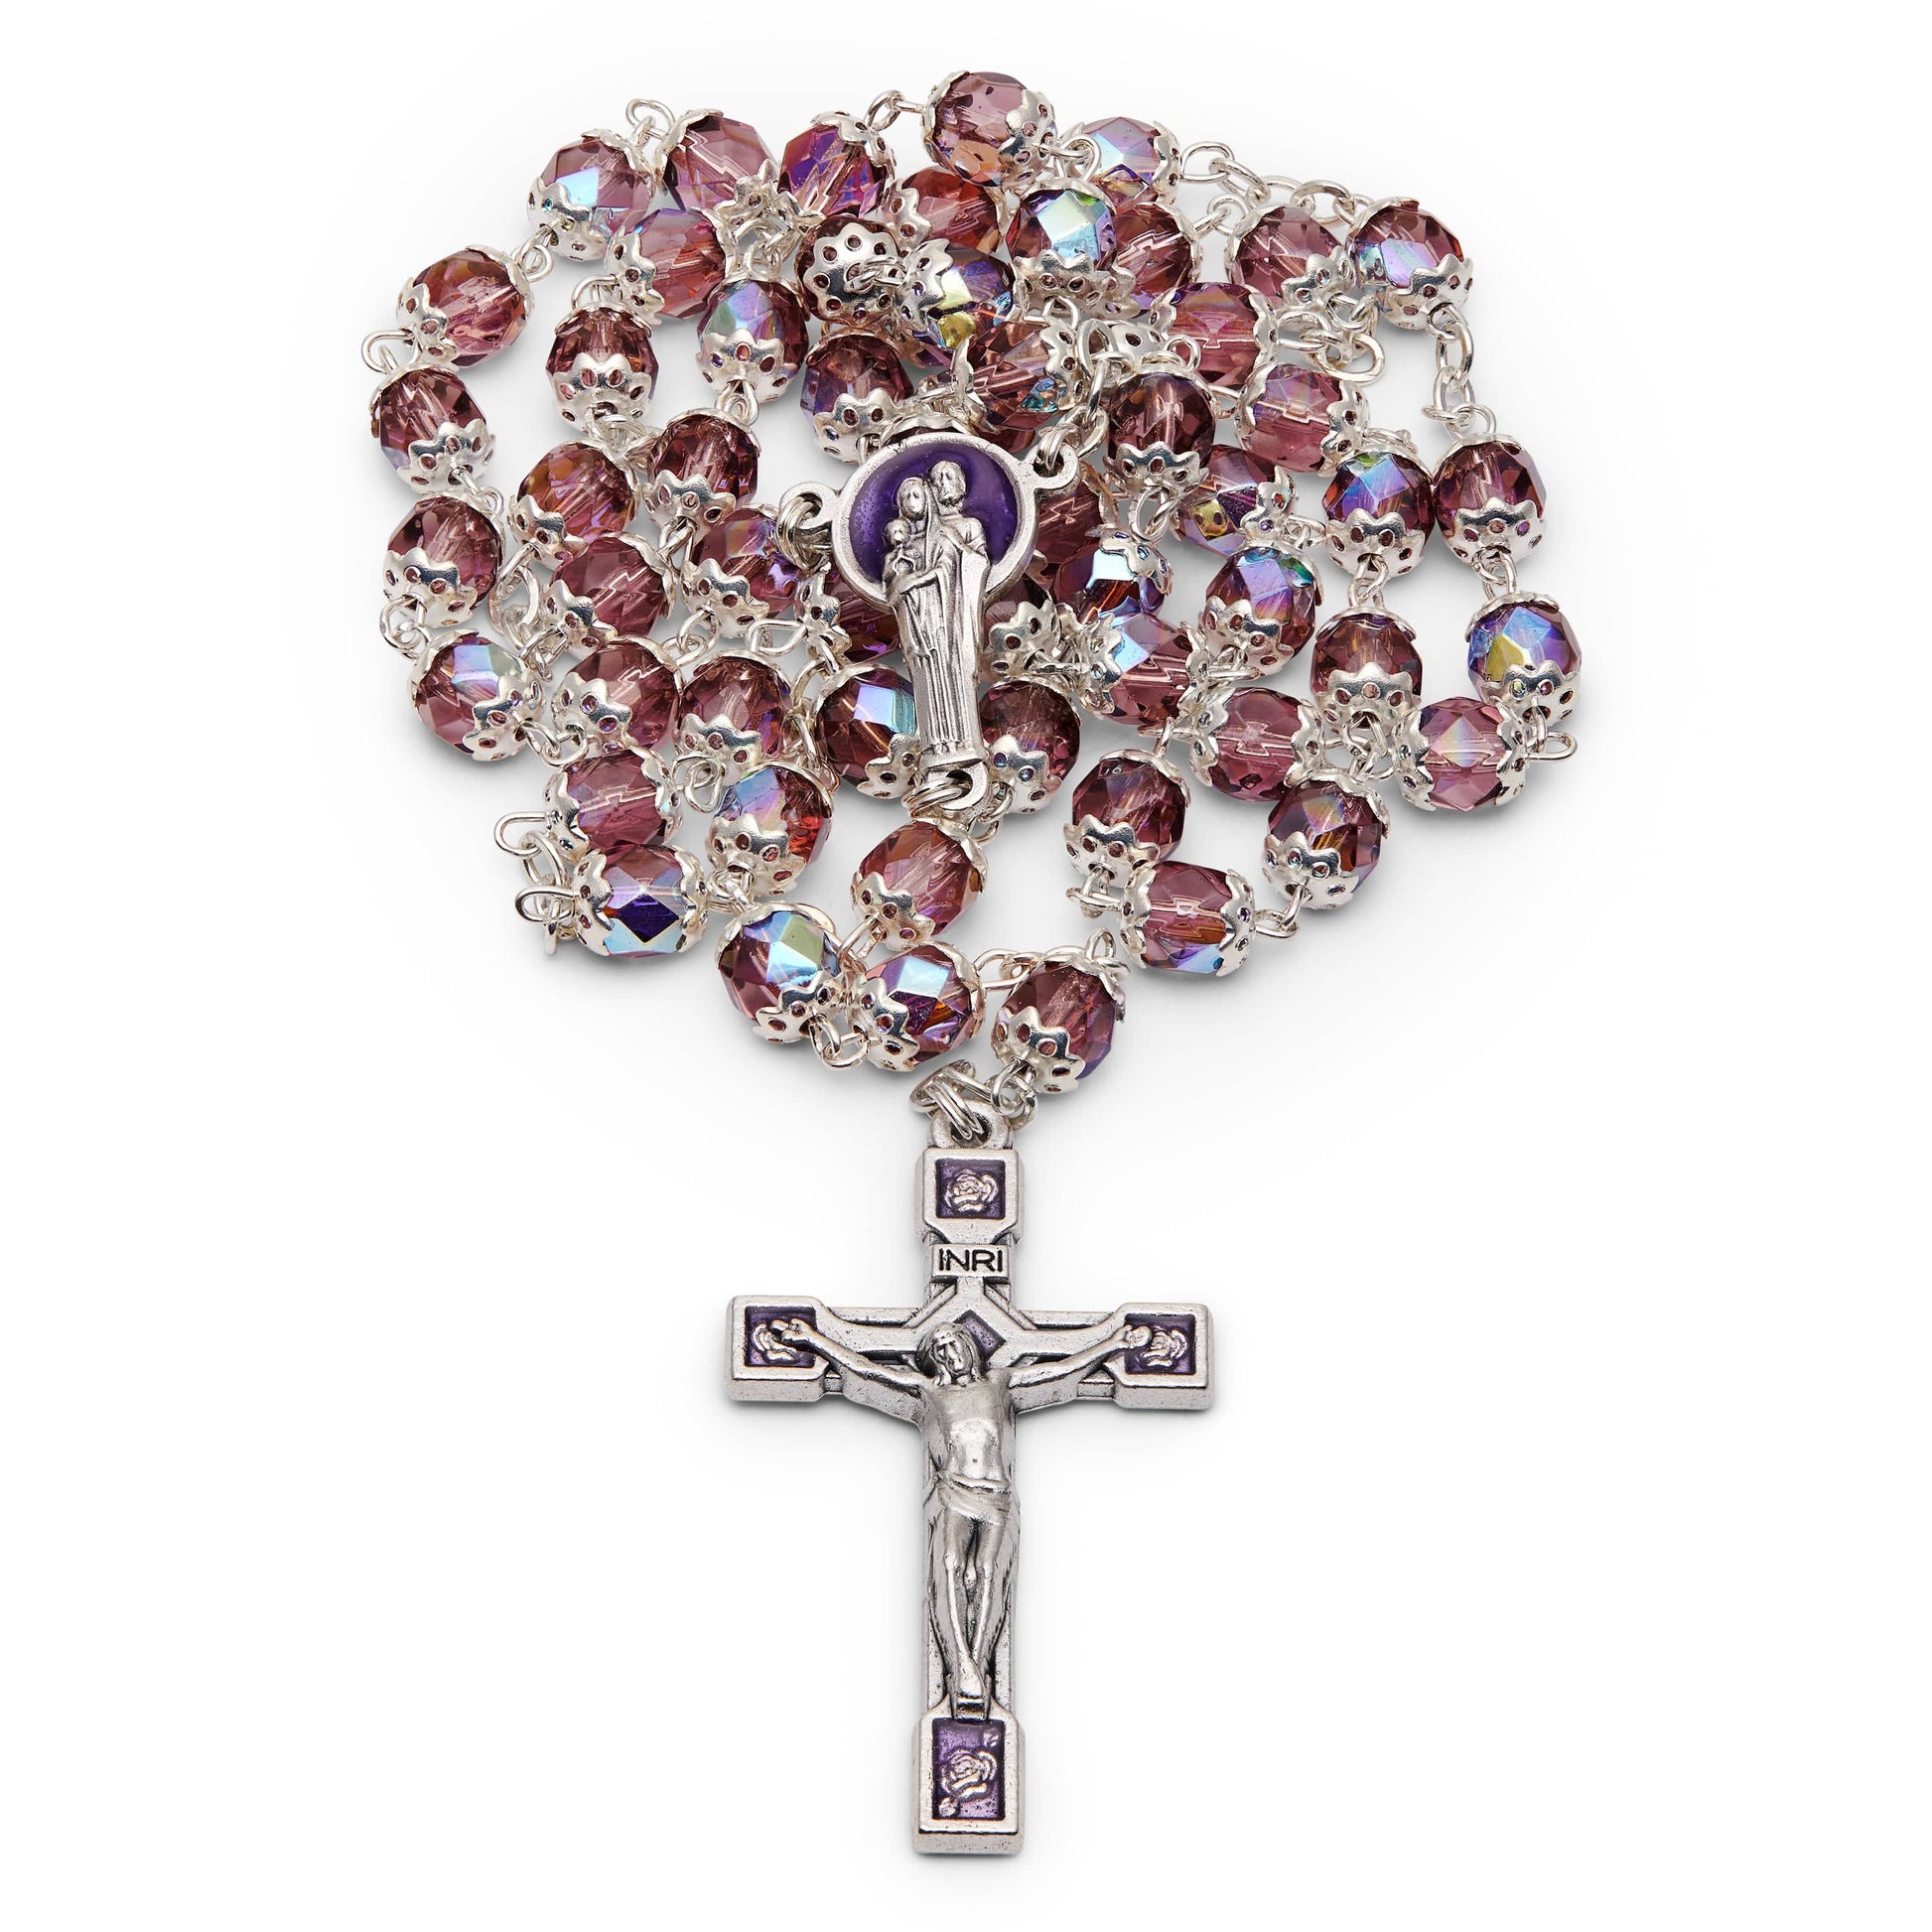 MONDO CATTOLICO Prayer Beads 51.5 cm (20.27 in) / 8 mm (0.31 in) Rosary Beads with enameled Holy Family centerpiece